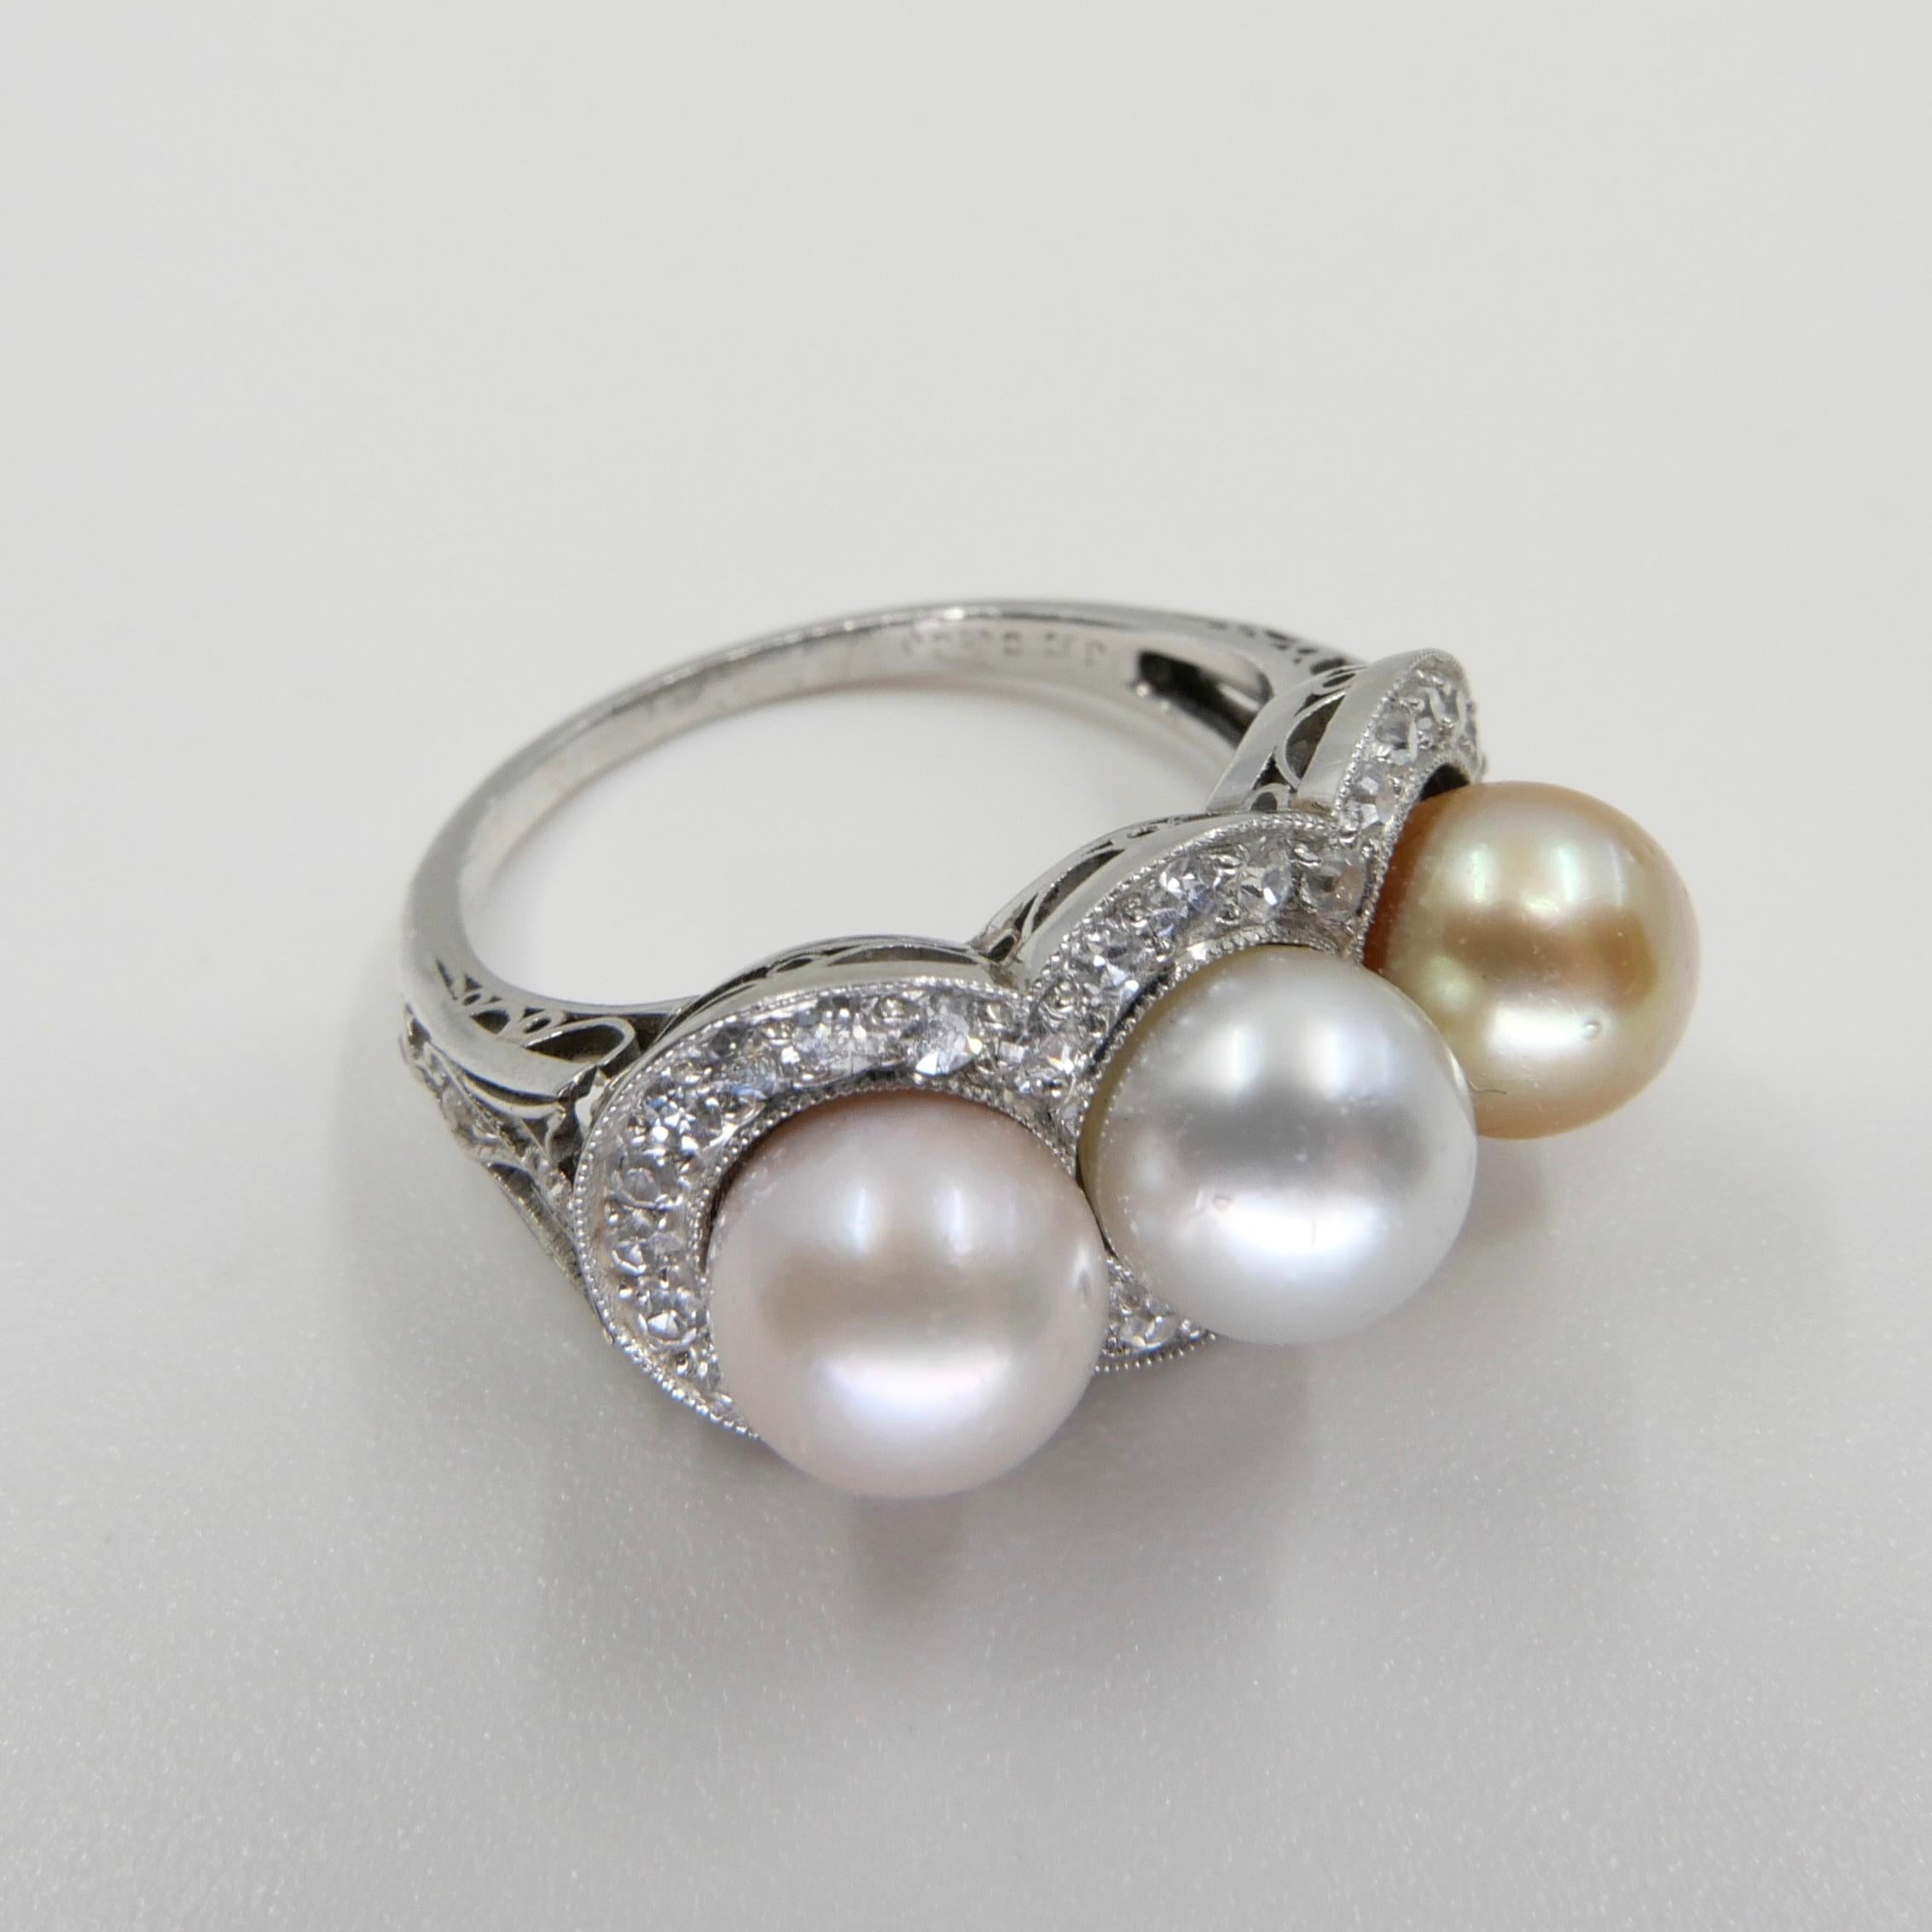 J E Caldwell Belle Epoque Certified 3 Natural Colored Pearls and Diamond Ring 7